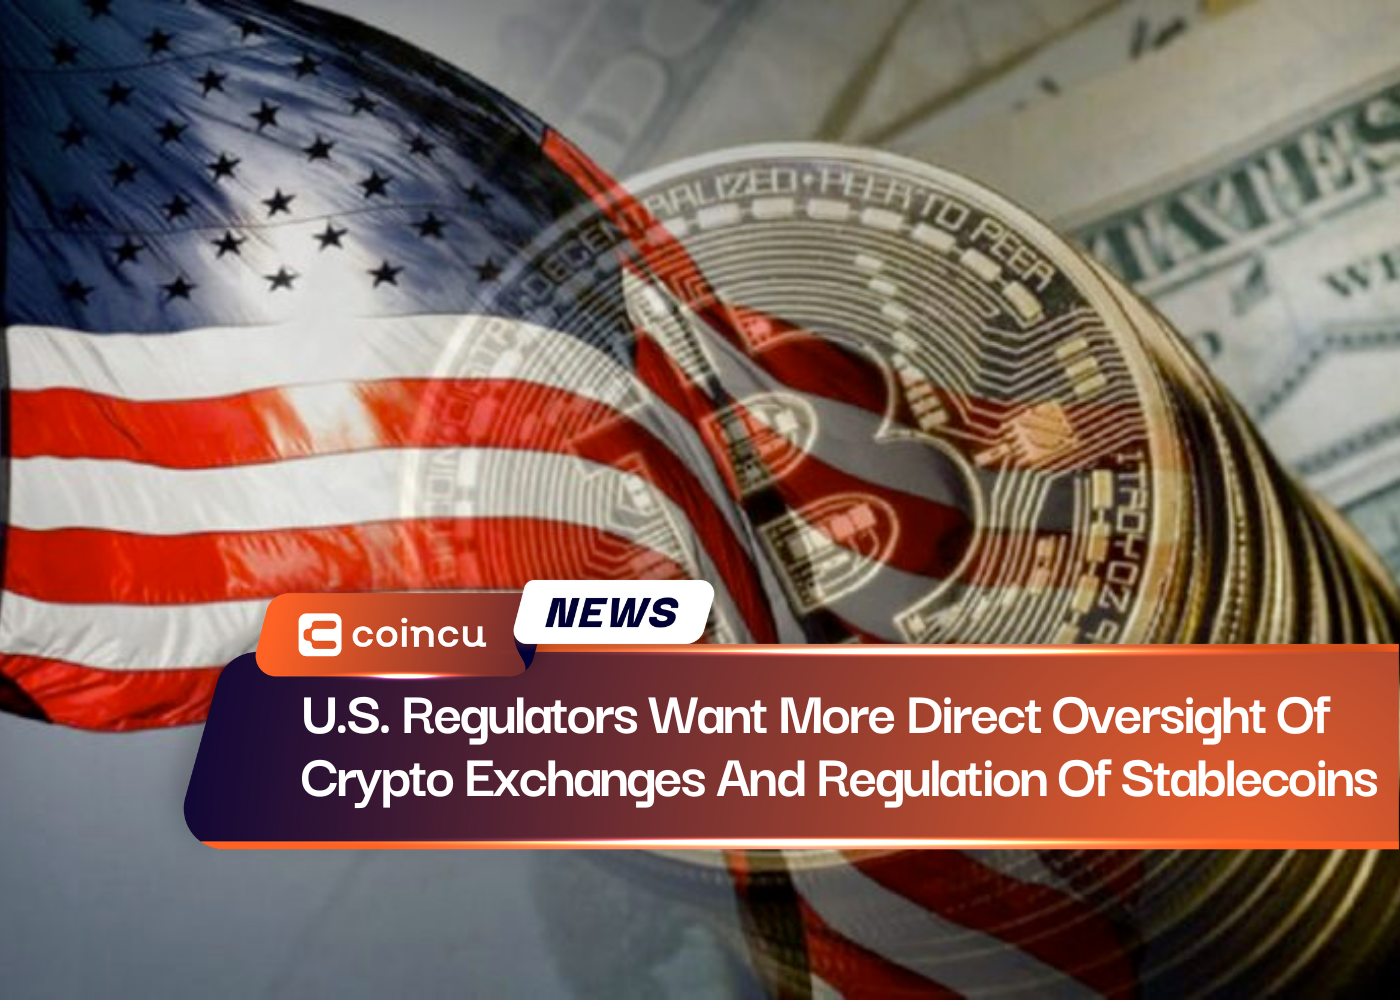 U.S. Regulators Want More Direct Oversight Of Crypto Exchanges And Regulation Of Stablecoins